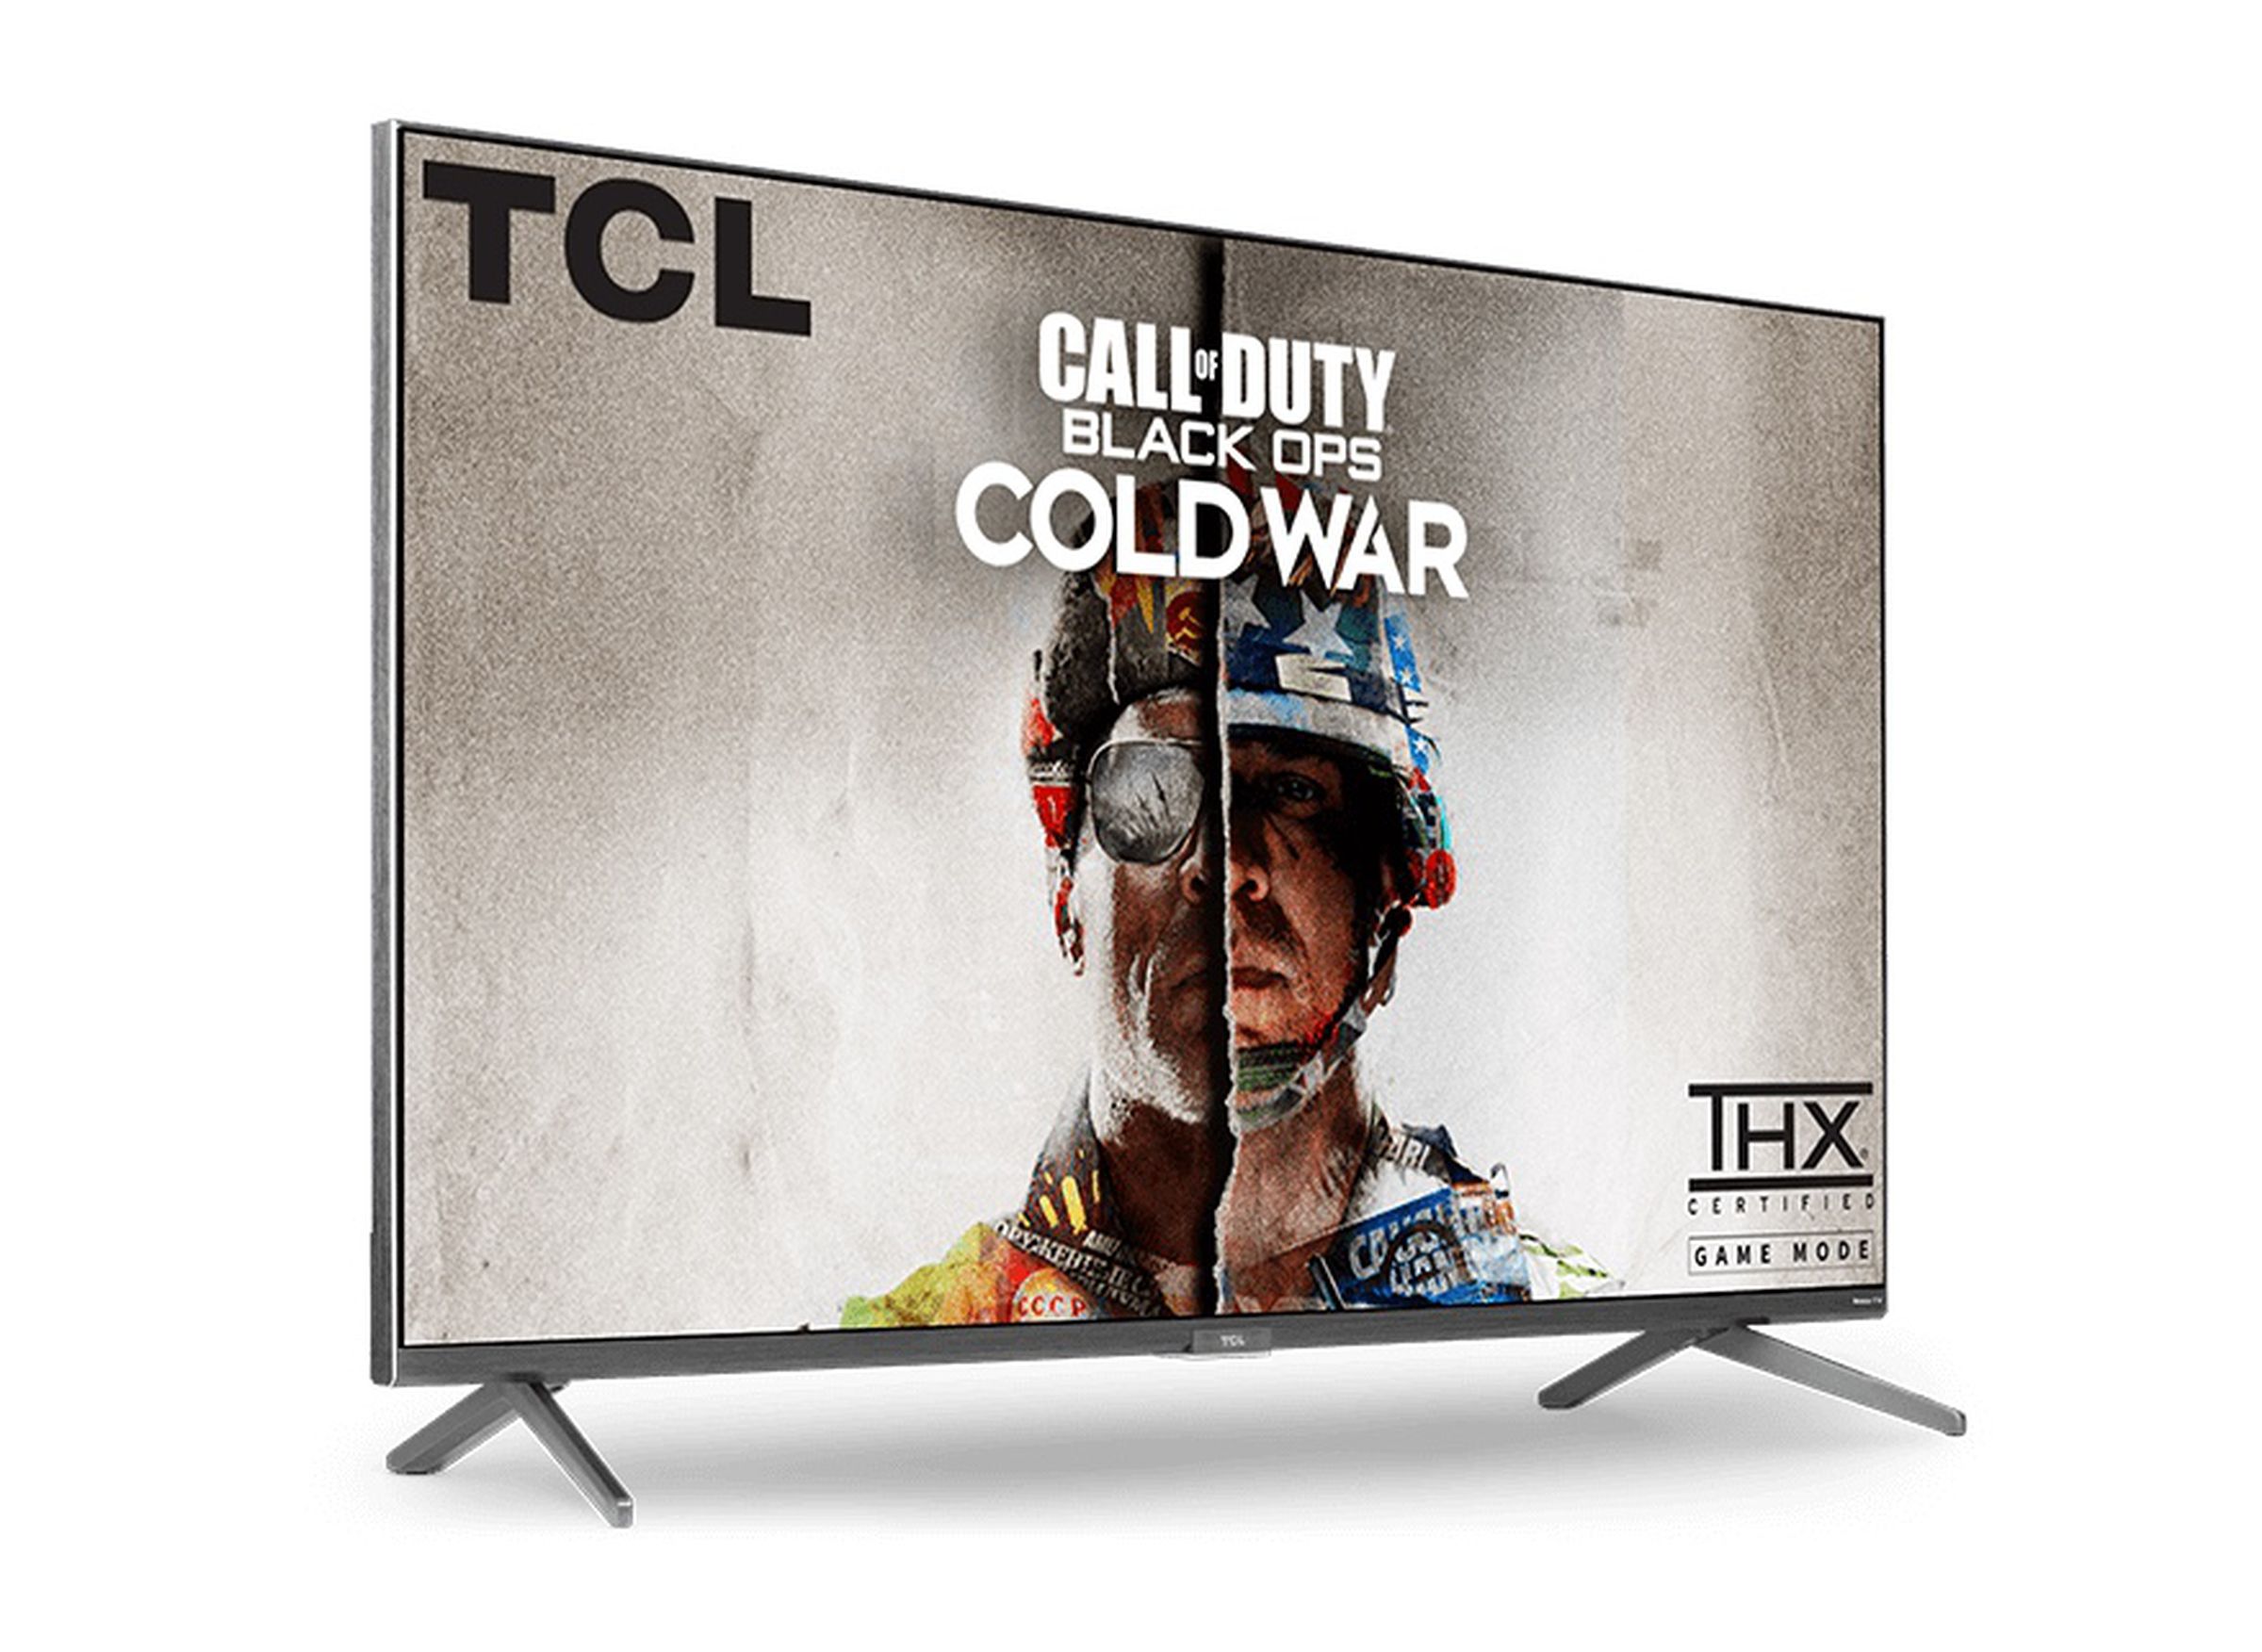 TCL’s 6-Series TV offers a nice mix of next-gen gaming features at an attractive price.